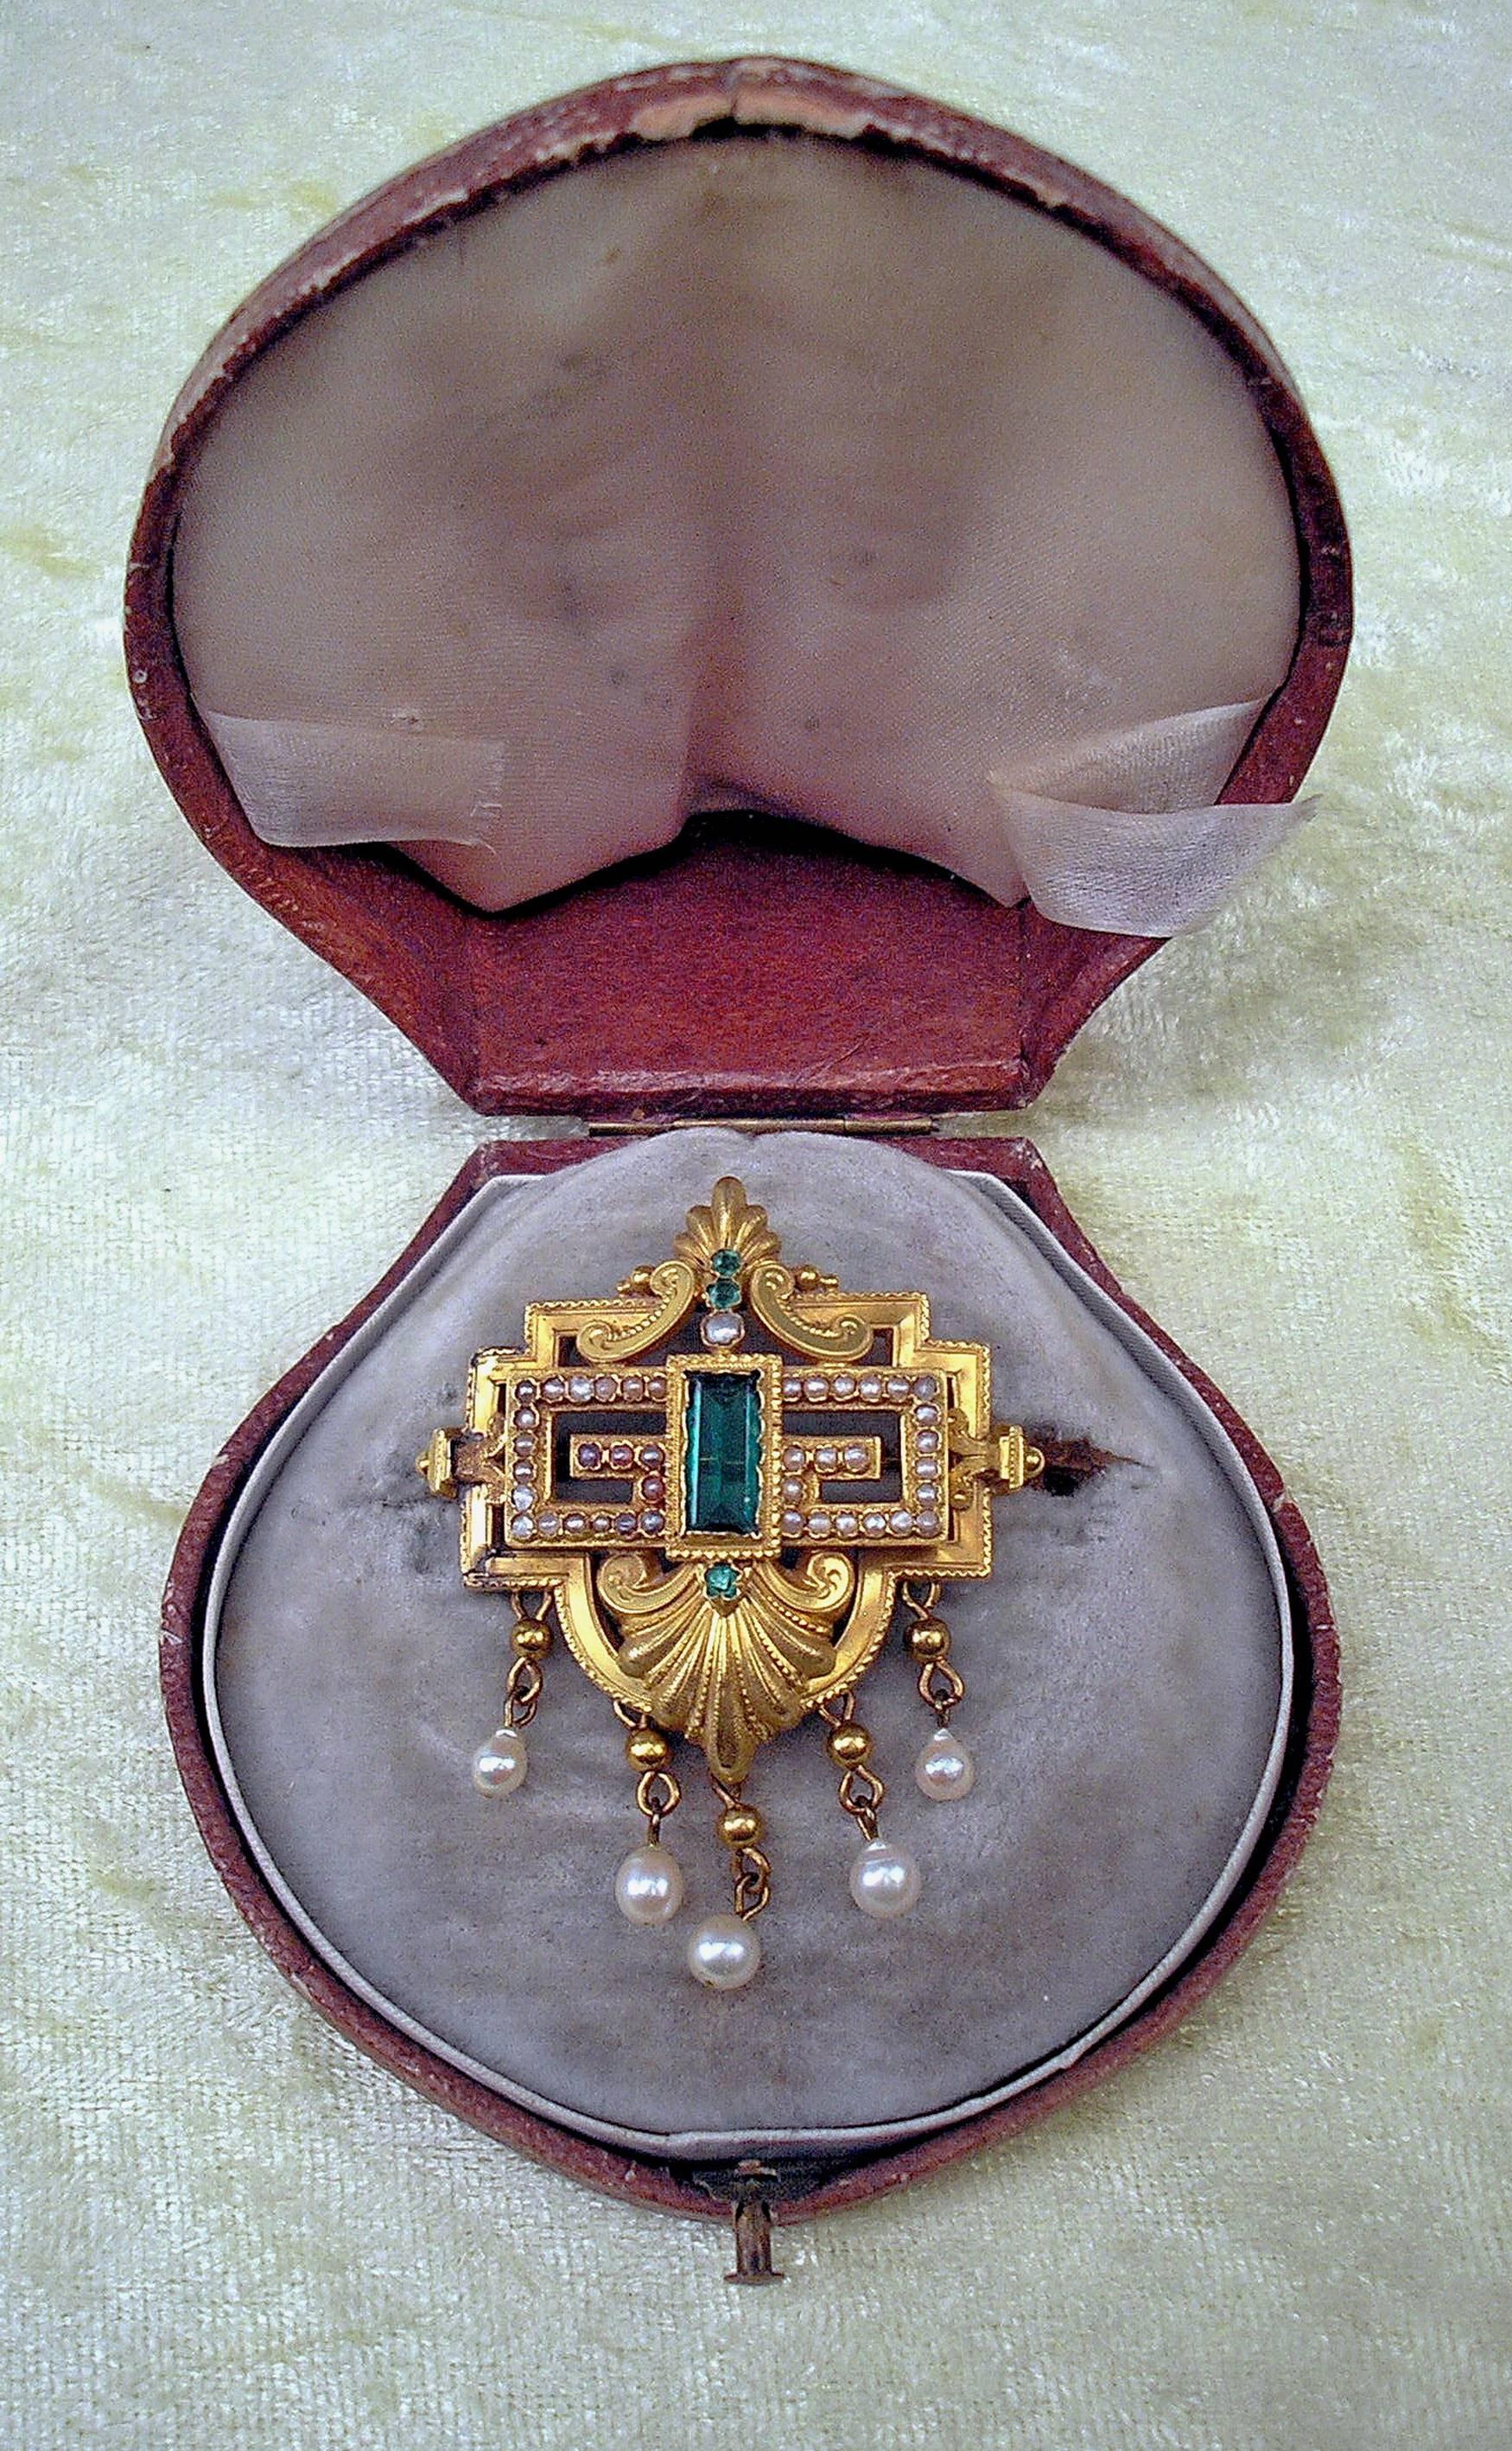 GOLDEN BIEDERMEIER  (= EARLY VICTORIAN)  BROOCH WITH EMERALDS AND PEARLS

GOLD  ( 14 ct    585)      EMERALDS    SOME LARGER PEARLS ARE ATTACHED TO HANGING RINGS
WEIGHT: 10.2 GRAMS     (= 3.59 oz)
AUSTRIAN OFFICIAL HALLMARKS EXISTING. 

41 PEARLS